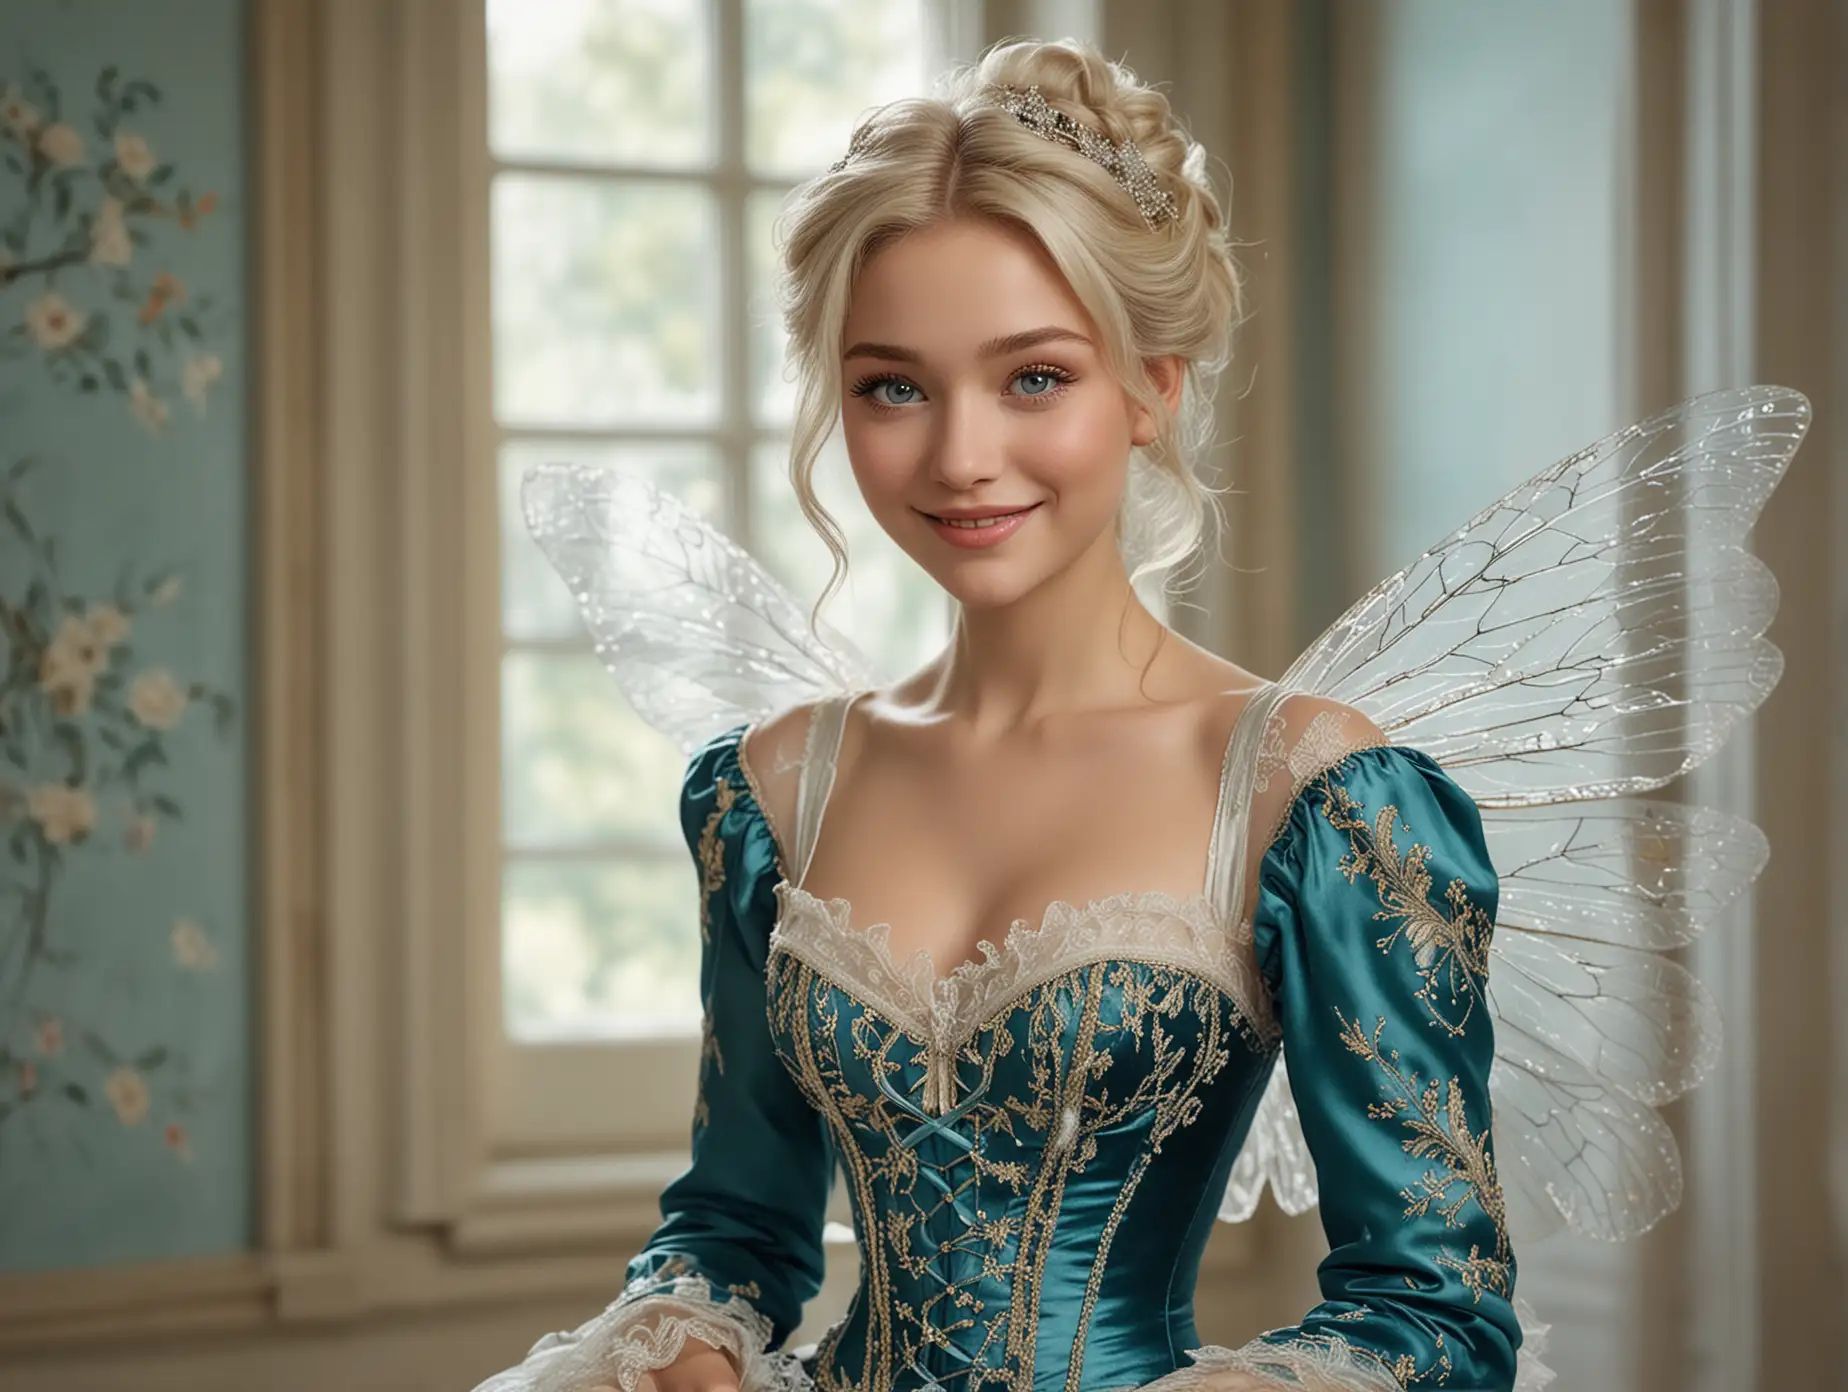 This image portrays a charming, animated fairy with an aura of grace and curiosity. She has stunningly detailed, large iridescent wings that resemble those of a dragonfly, reflecting light and color with an ethereal quality. Her hair is styled in a sophisticated updo with cascading waves of platinum blonde, and her facial features are highlighted by bright blue eyes and a gentle, welcoming smile.

She wears a bright blue velvet teal jacket with delicate, lace-like trim at the edges, and underneath, a corset-style top adorned with intricate, pastel-colored embroidery that adds a touch of elegance to her appearance. The background suggests she is in a sunlit room with a view of the outside through a window, creating a warm and inviting atmosphere. The table in front of her holds a scroll, hinting at a setting of study or planning, perhaps for an enchanting adventure. Overall, the image blends fantastical elements with a serene domestic scene, encapsulating a moment of peaceful contemplation or creativity.